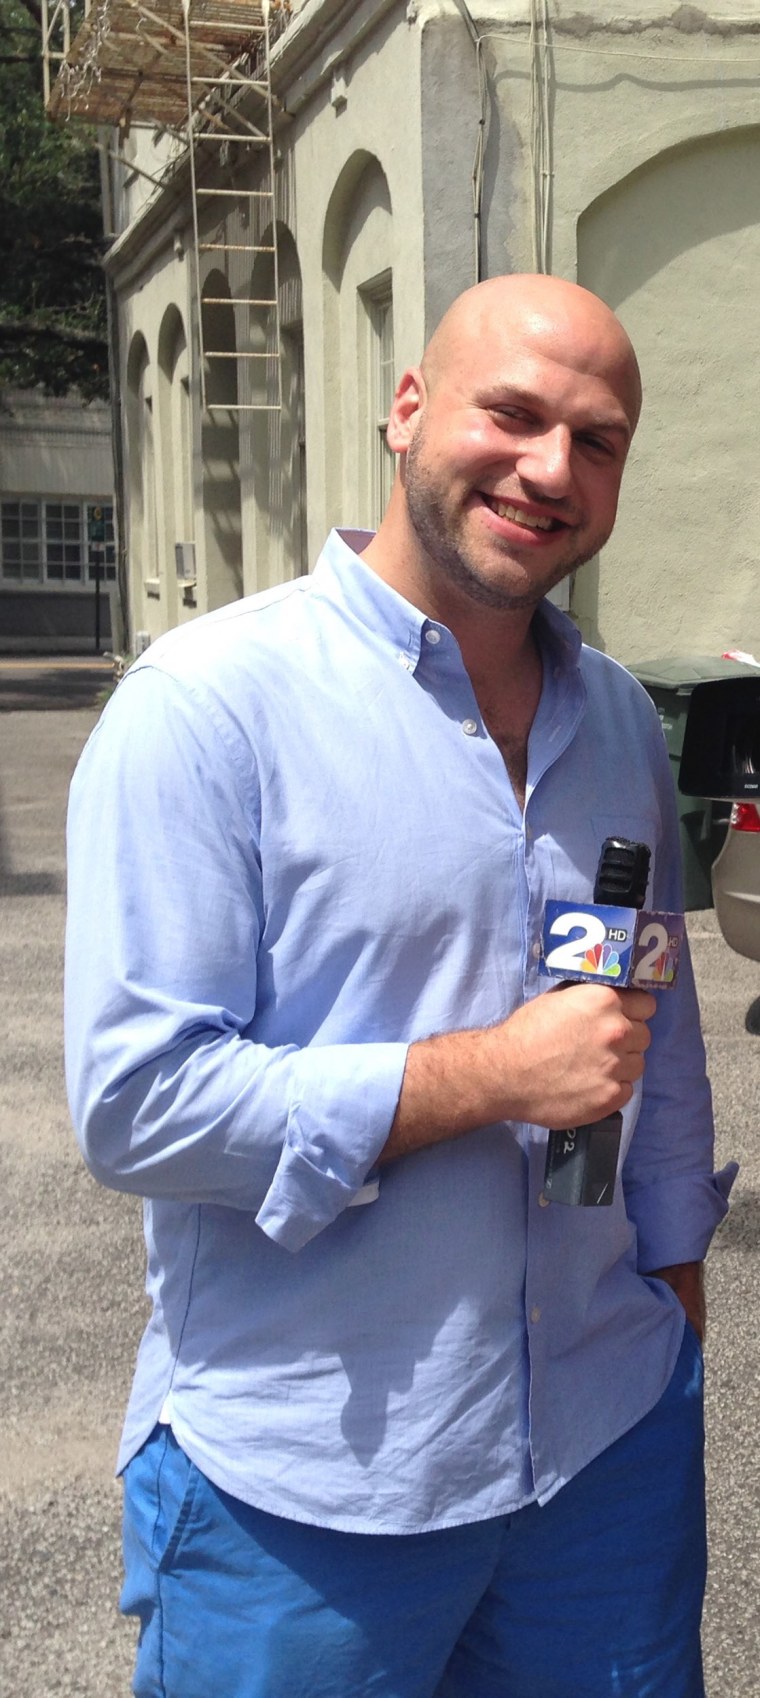 photo of yosef holding an nbc mic. This image was taken before he got into running 